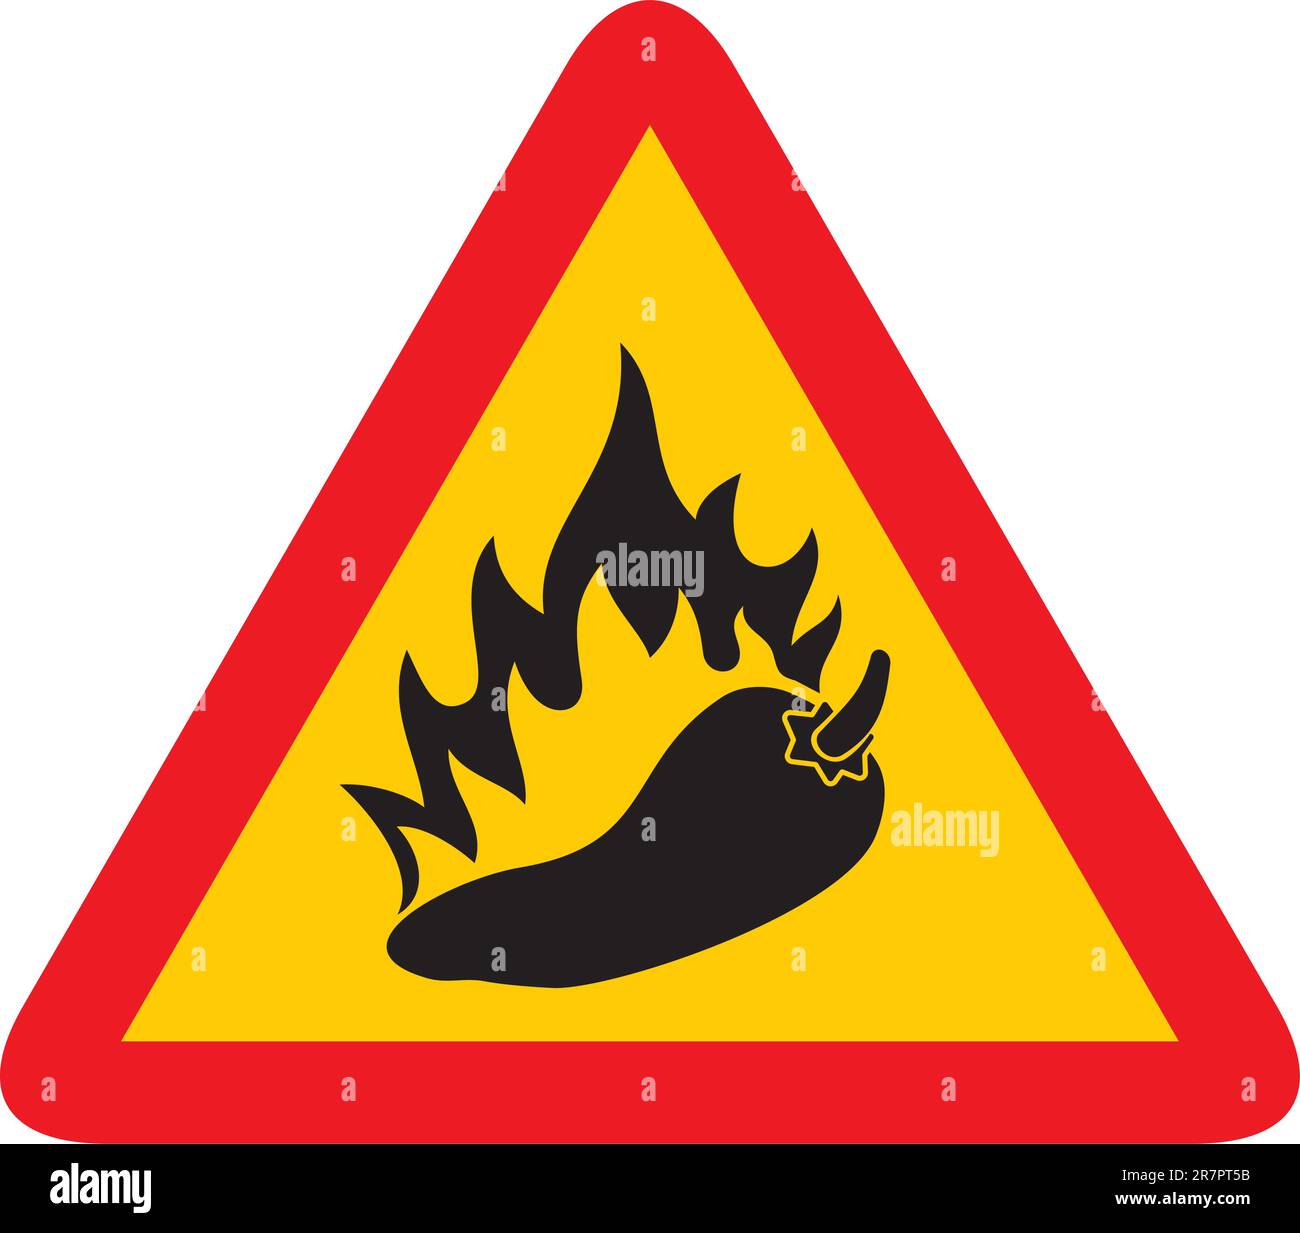 Triangle warning sign with a pepper and flame silhouette. Stock Vector